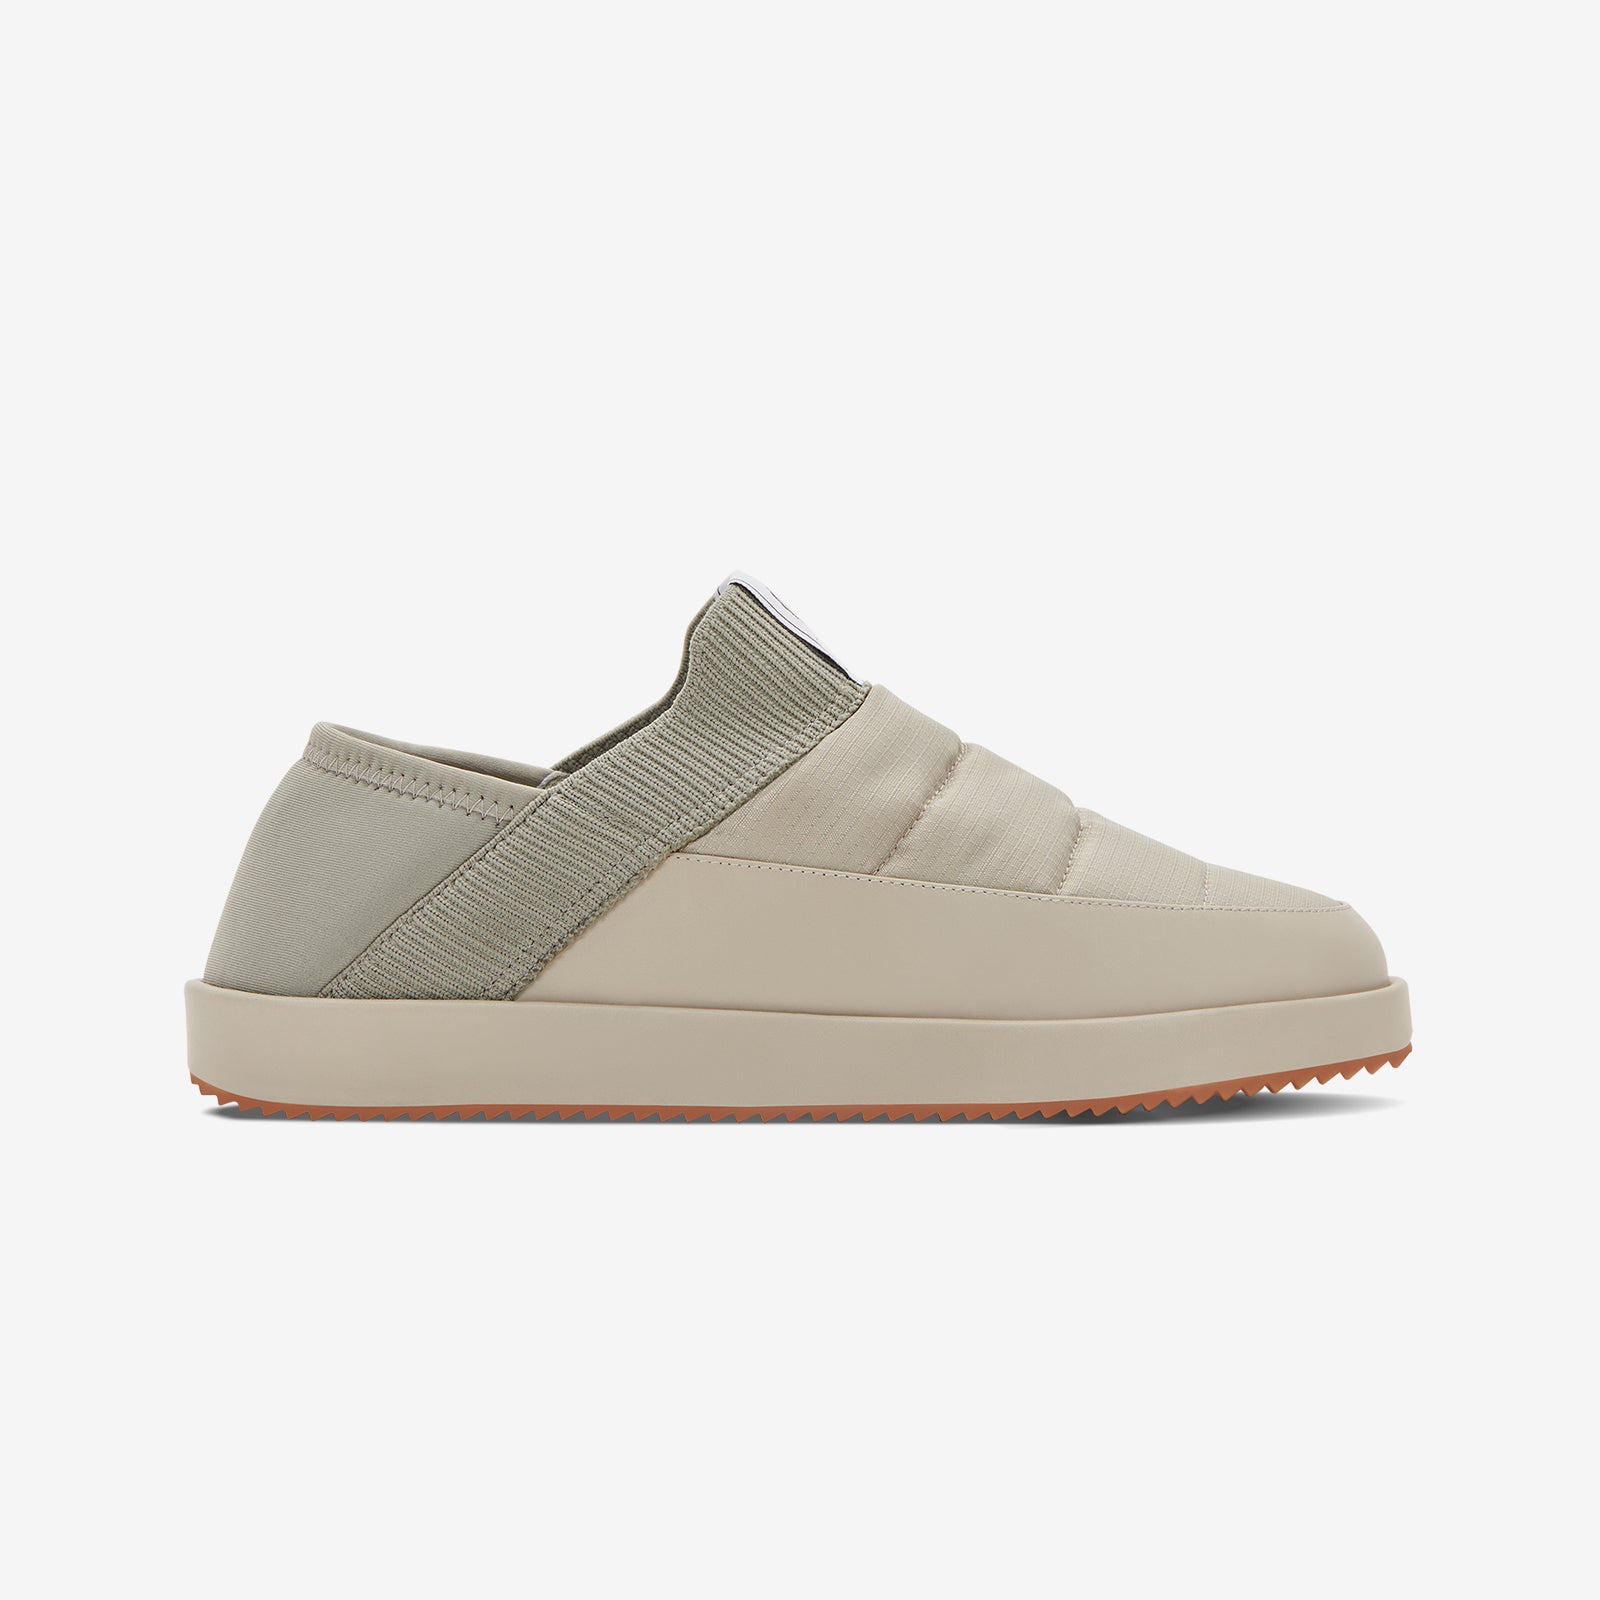 Greats - The Foster Slipper Closed Grey - Gender Neutral Shoe – GREATS